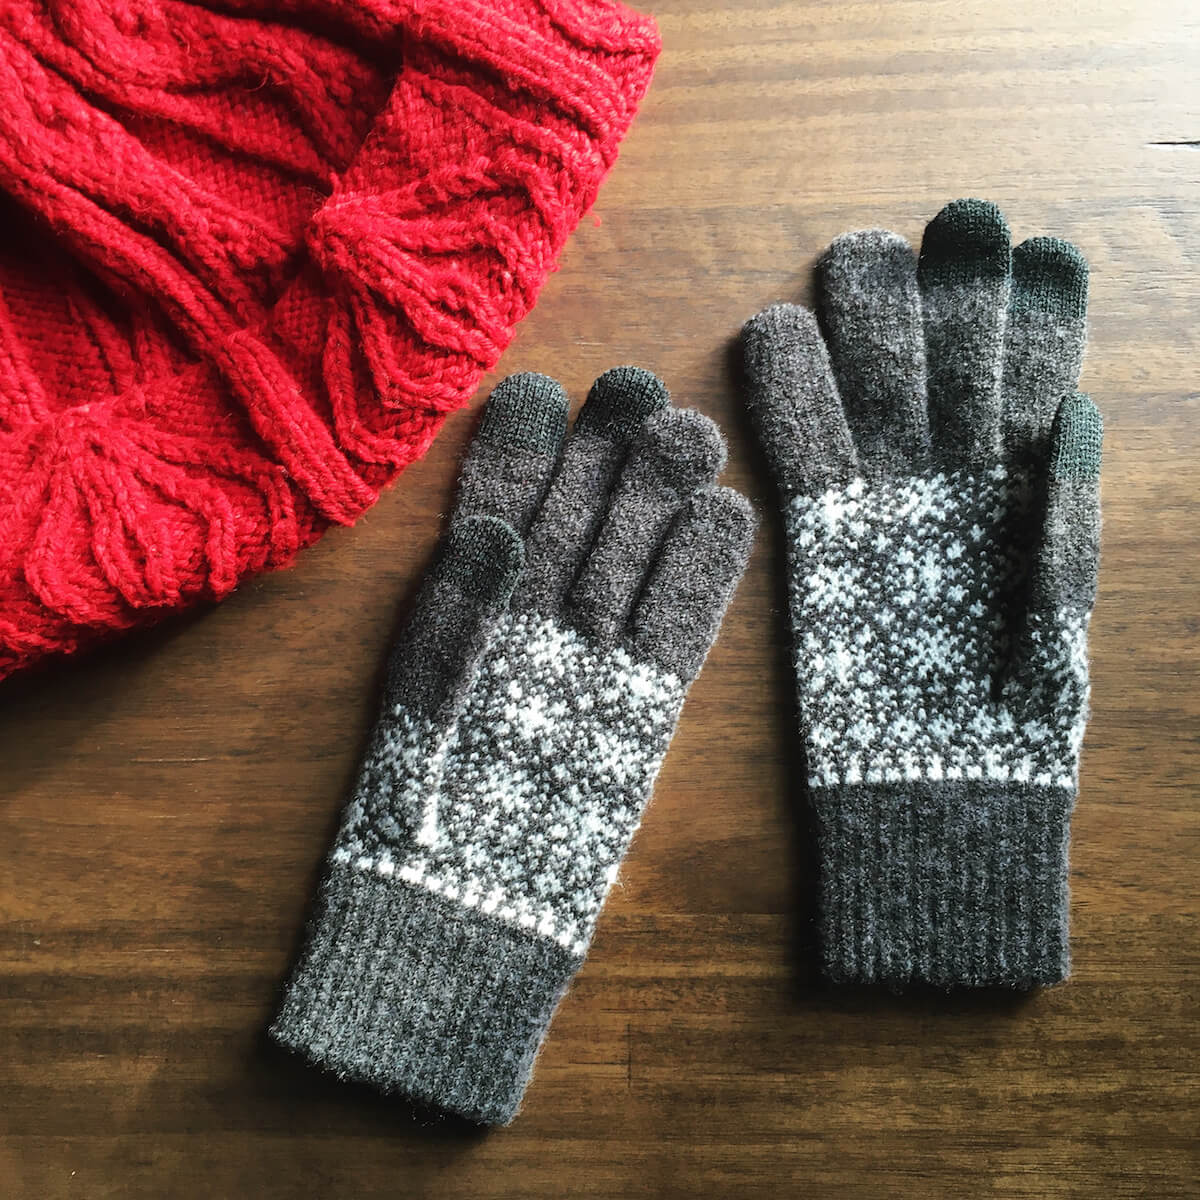 A pair of gray knit gloves with a snowflake pattern on a wood surface